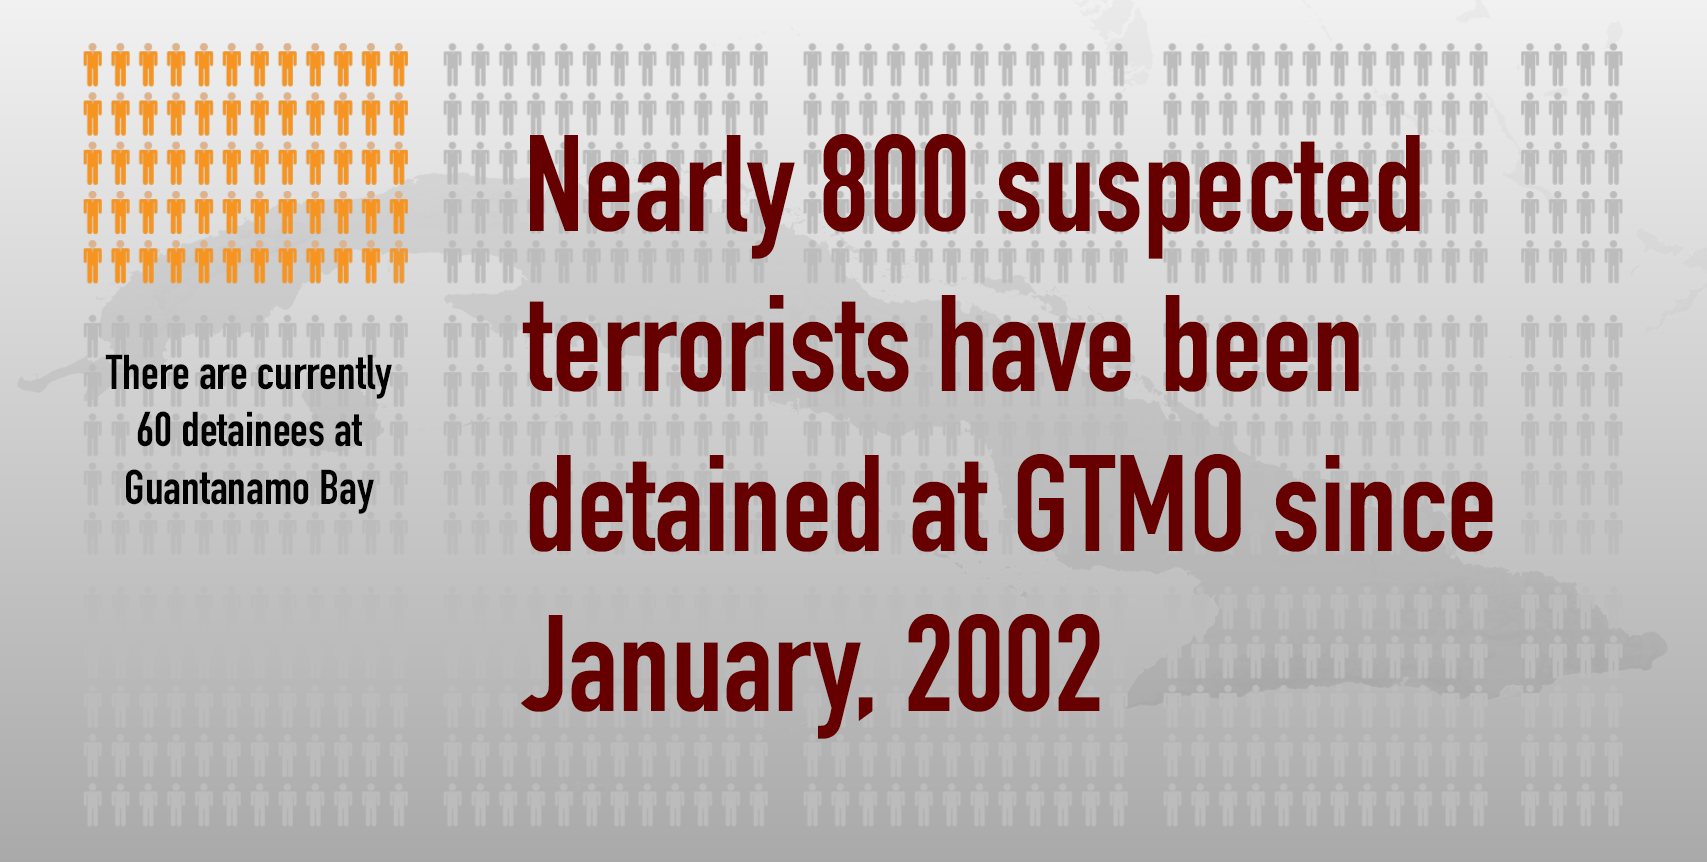 Since 2002, nearly 800 accused terrorists have been detained at GTMO. Only 60 remain. None might be left if it weren’t for opposition in the U.S. Congress. 